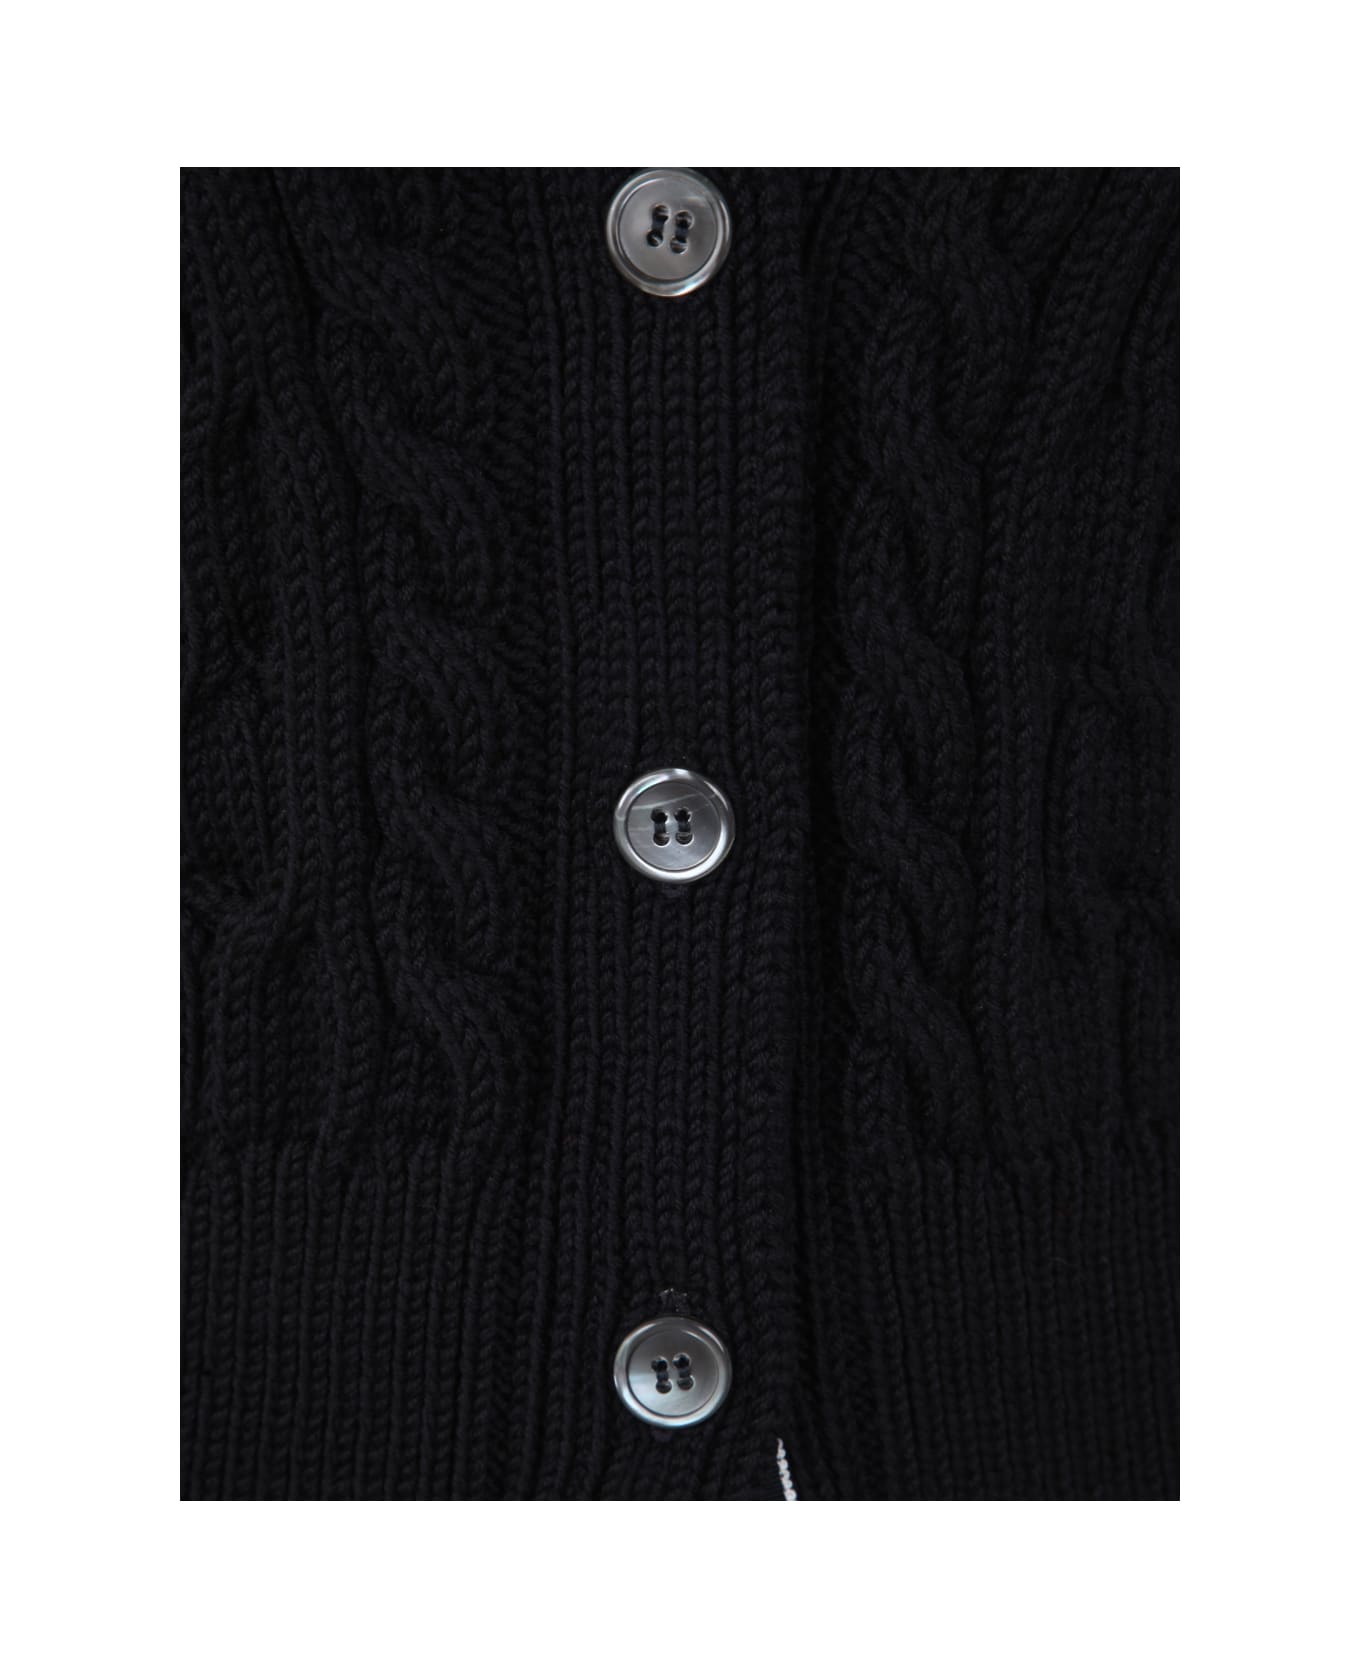 Thom Browne Crisscross Cable Stitch 3/4 Sleeve V Neck Cardigan In Merino Wool With Rolled Cuffs And Rwb Tabs - Navy